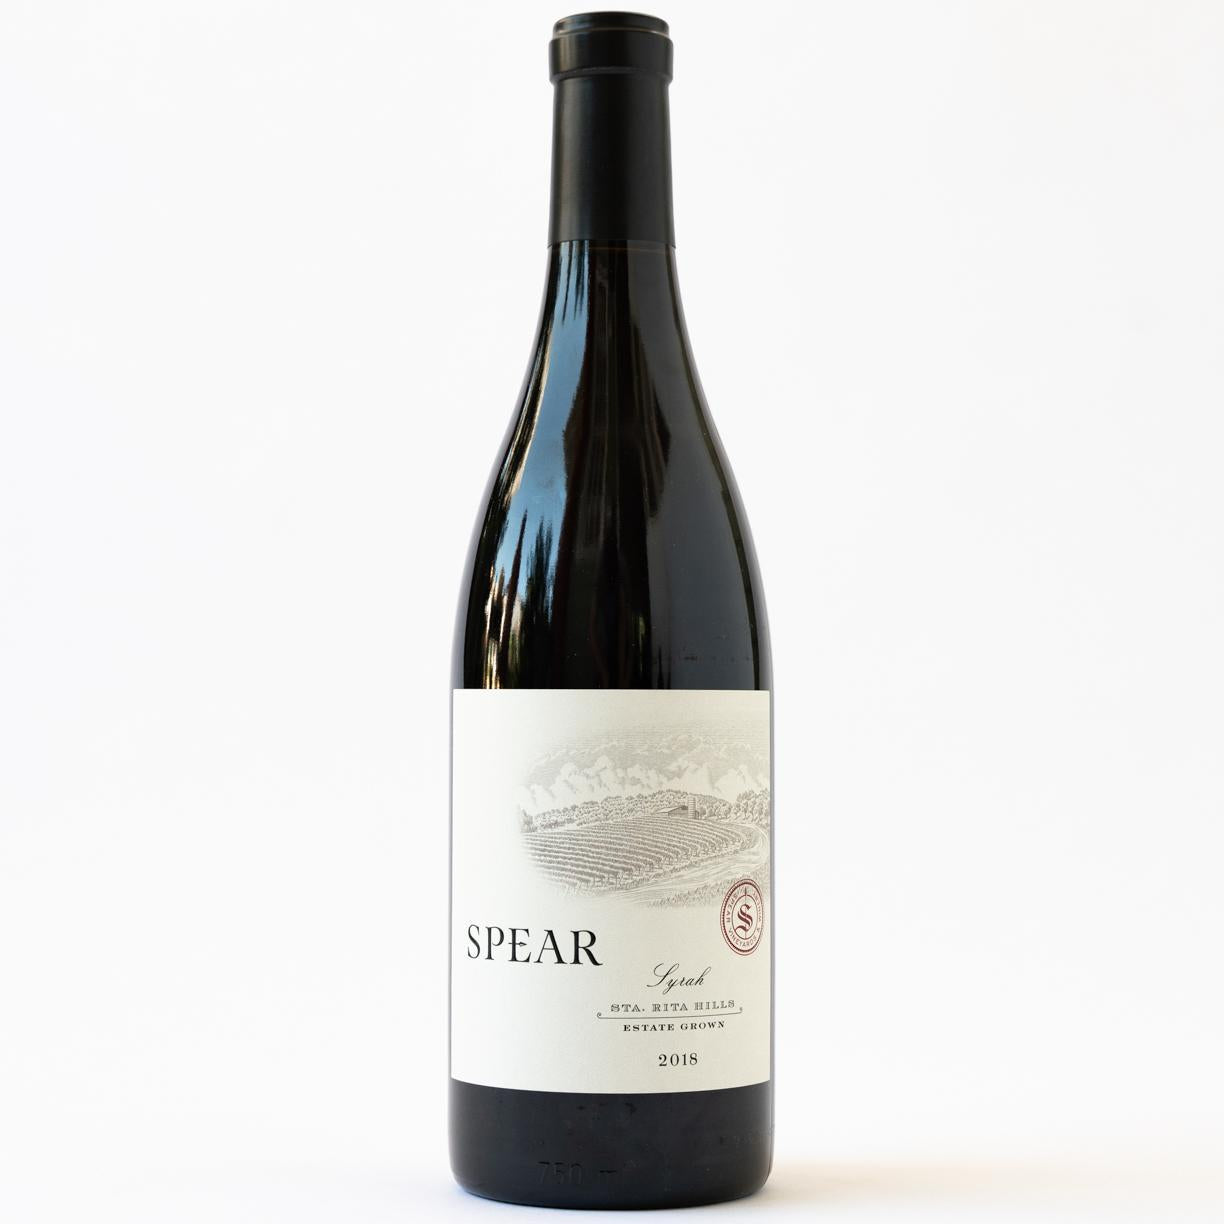 Bottle of Spear's Syrah on a white background